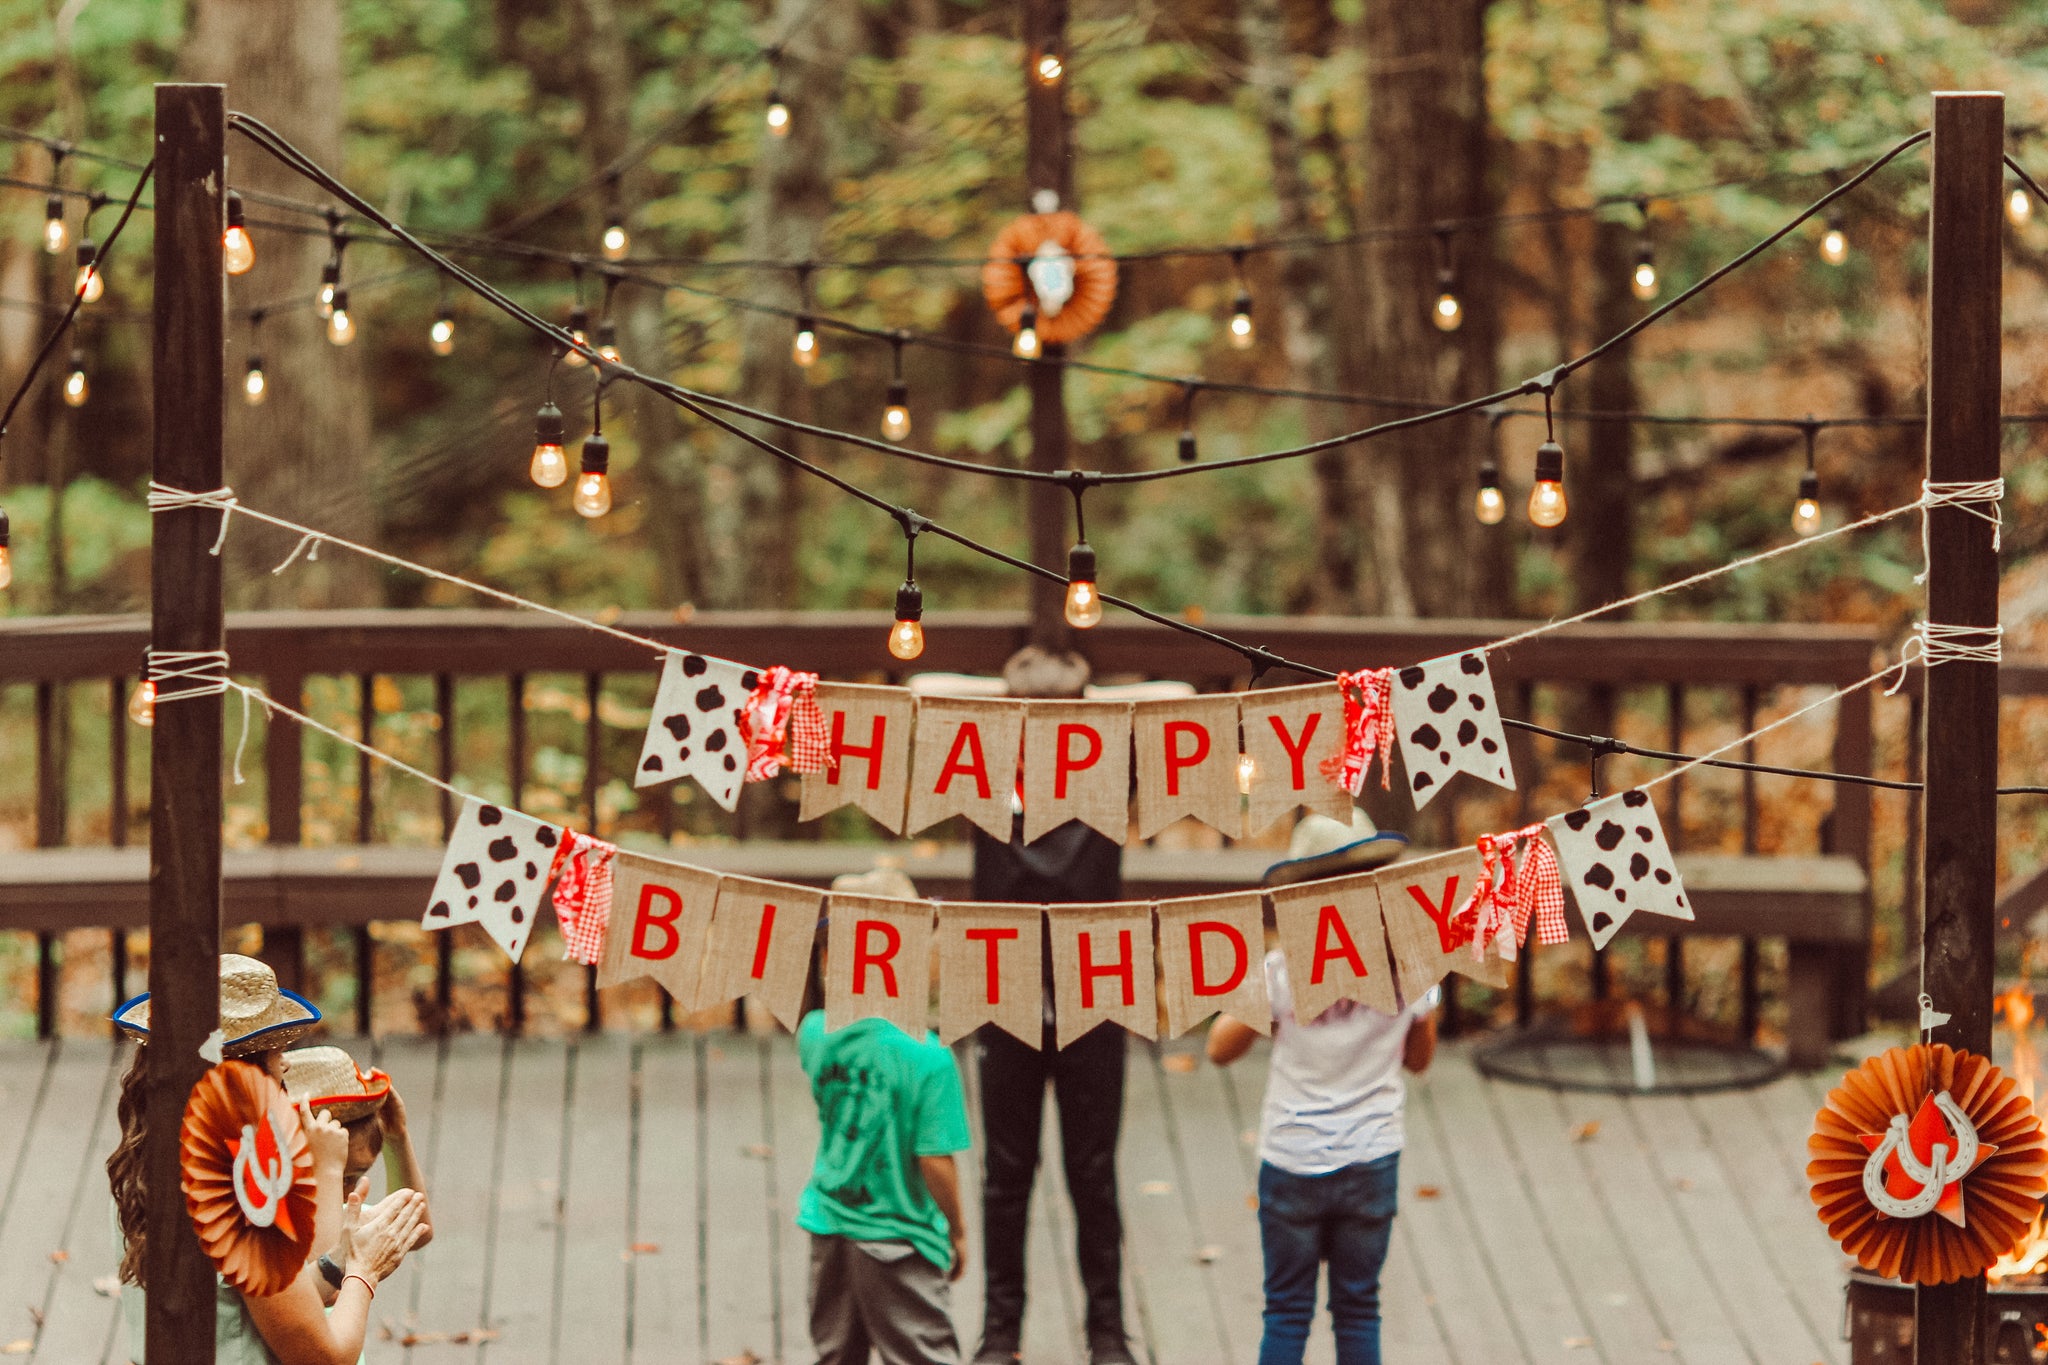 5 Amazing Party Ideas to Make Your Toddler’s Birthday Special During COVID-19